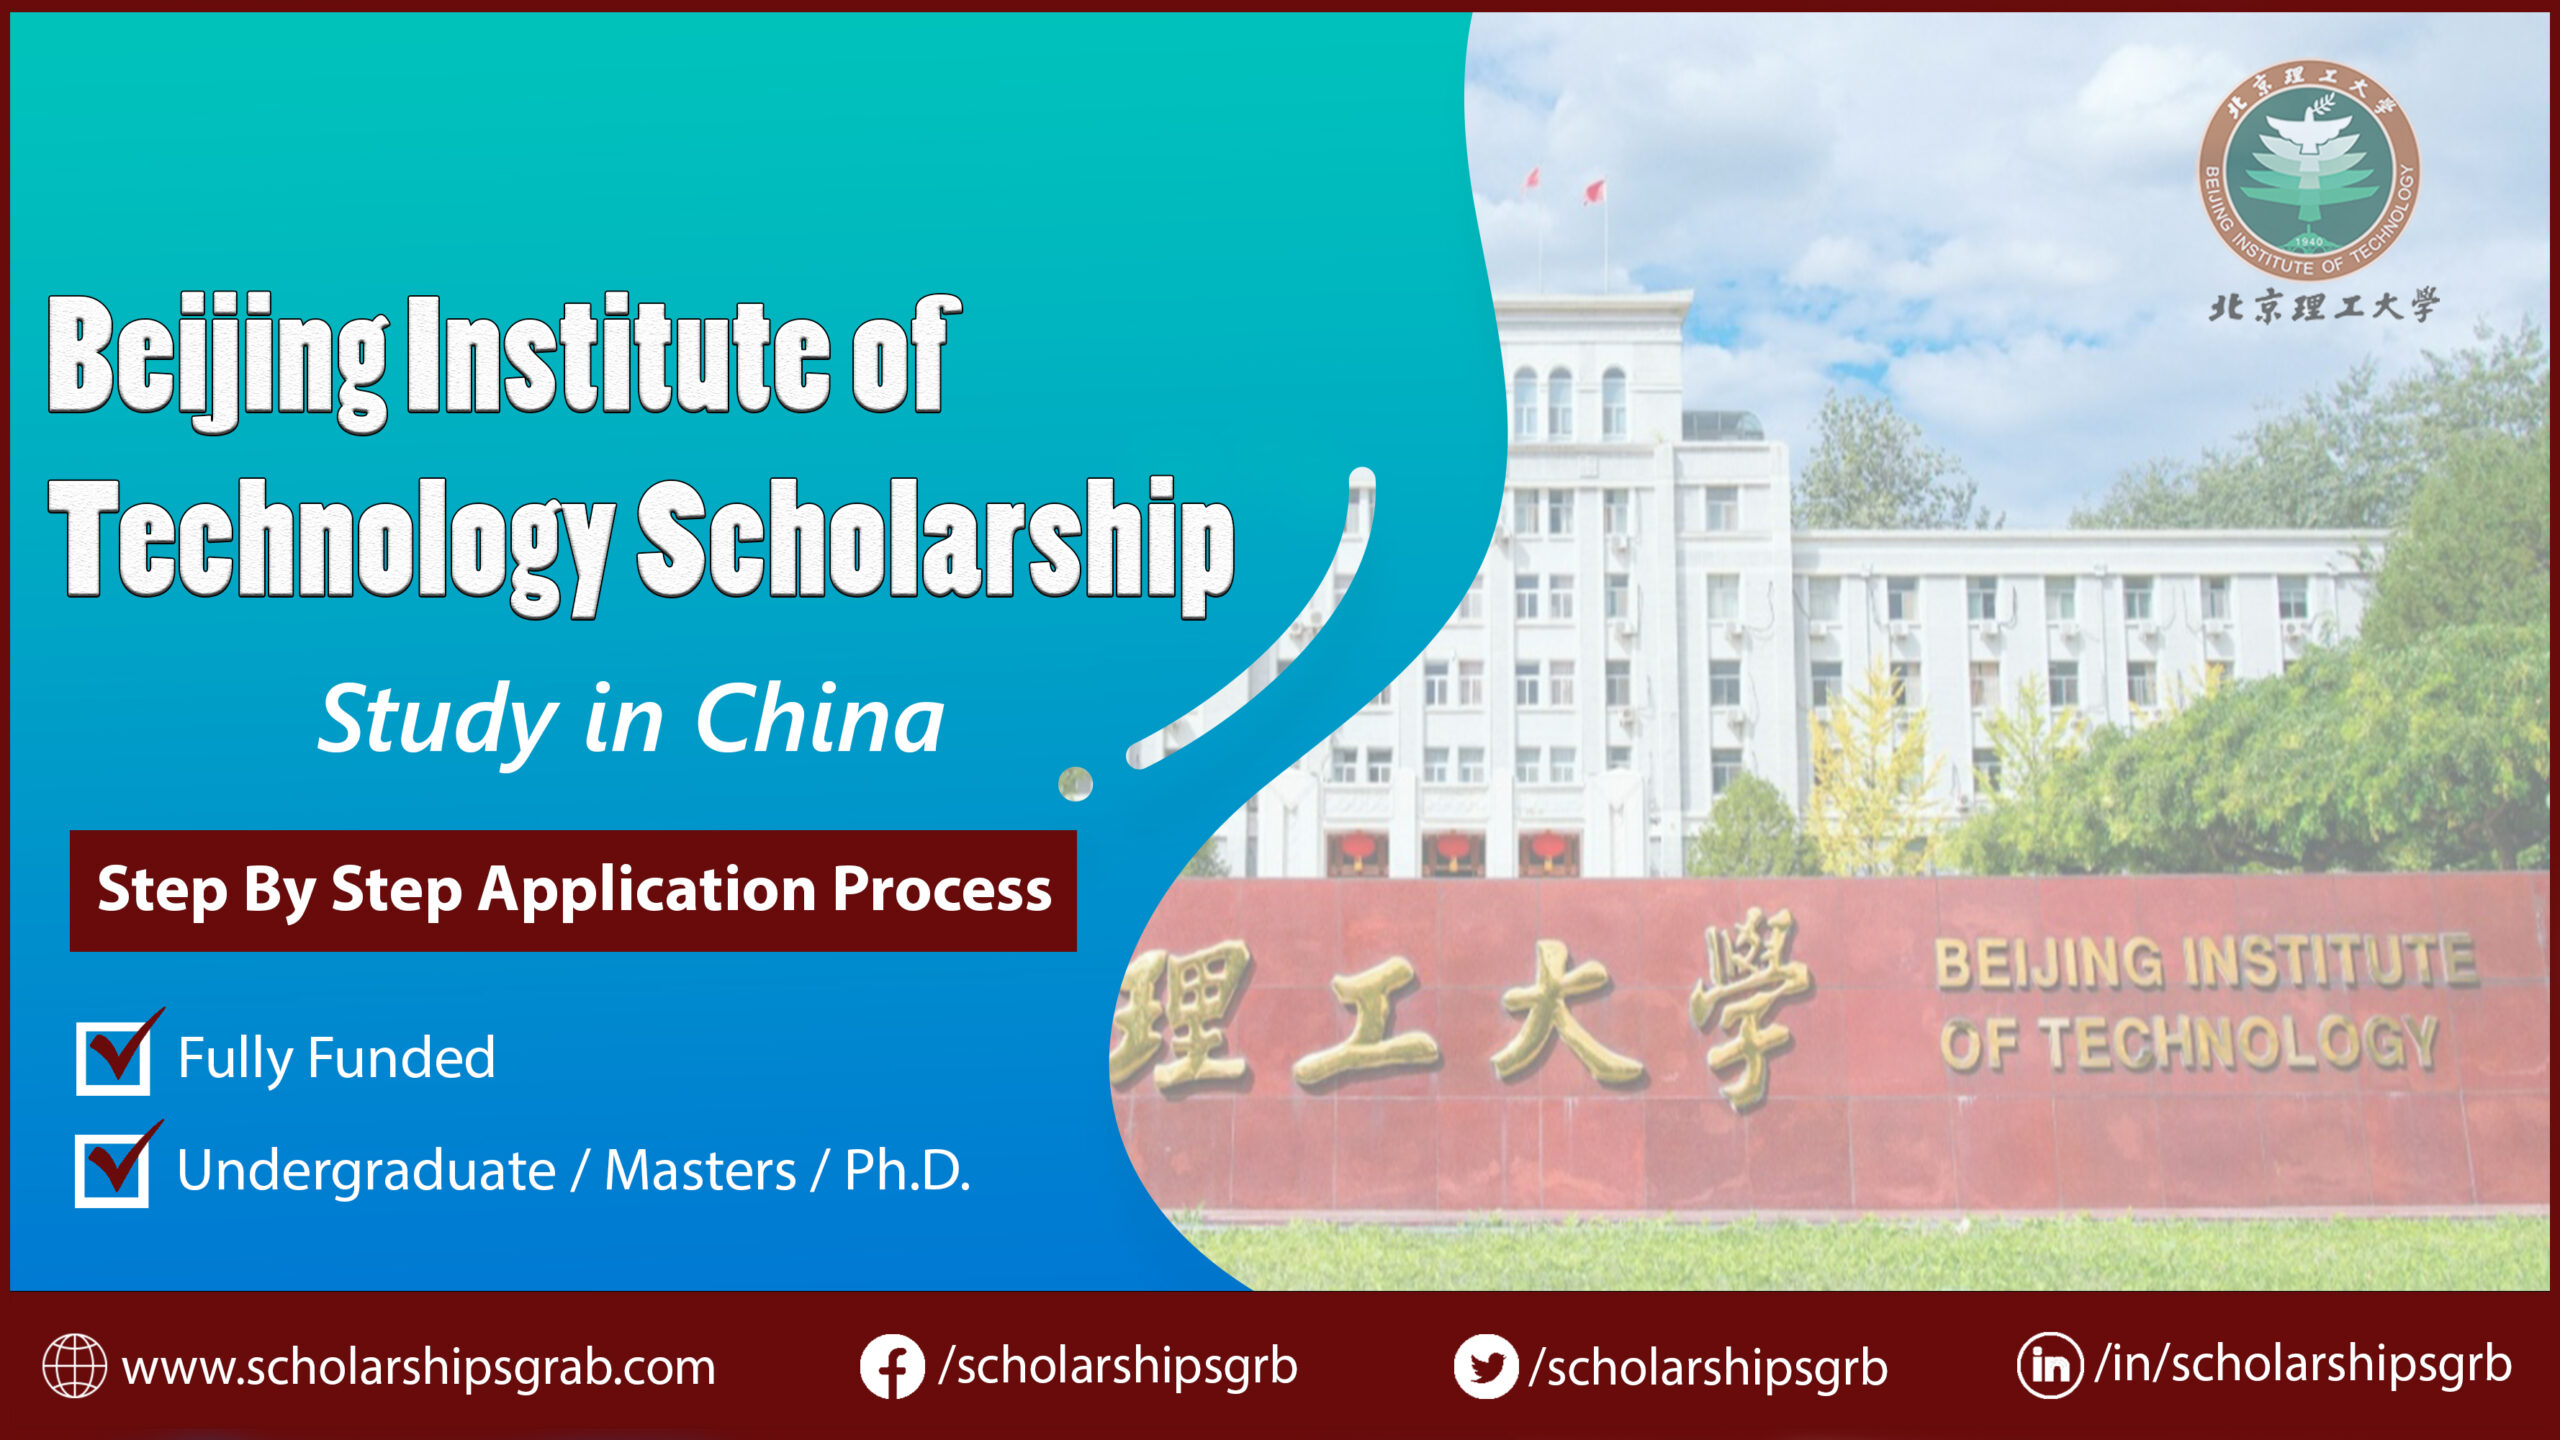 Beijing Institute of Technology Scholarships Study in China